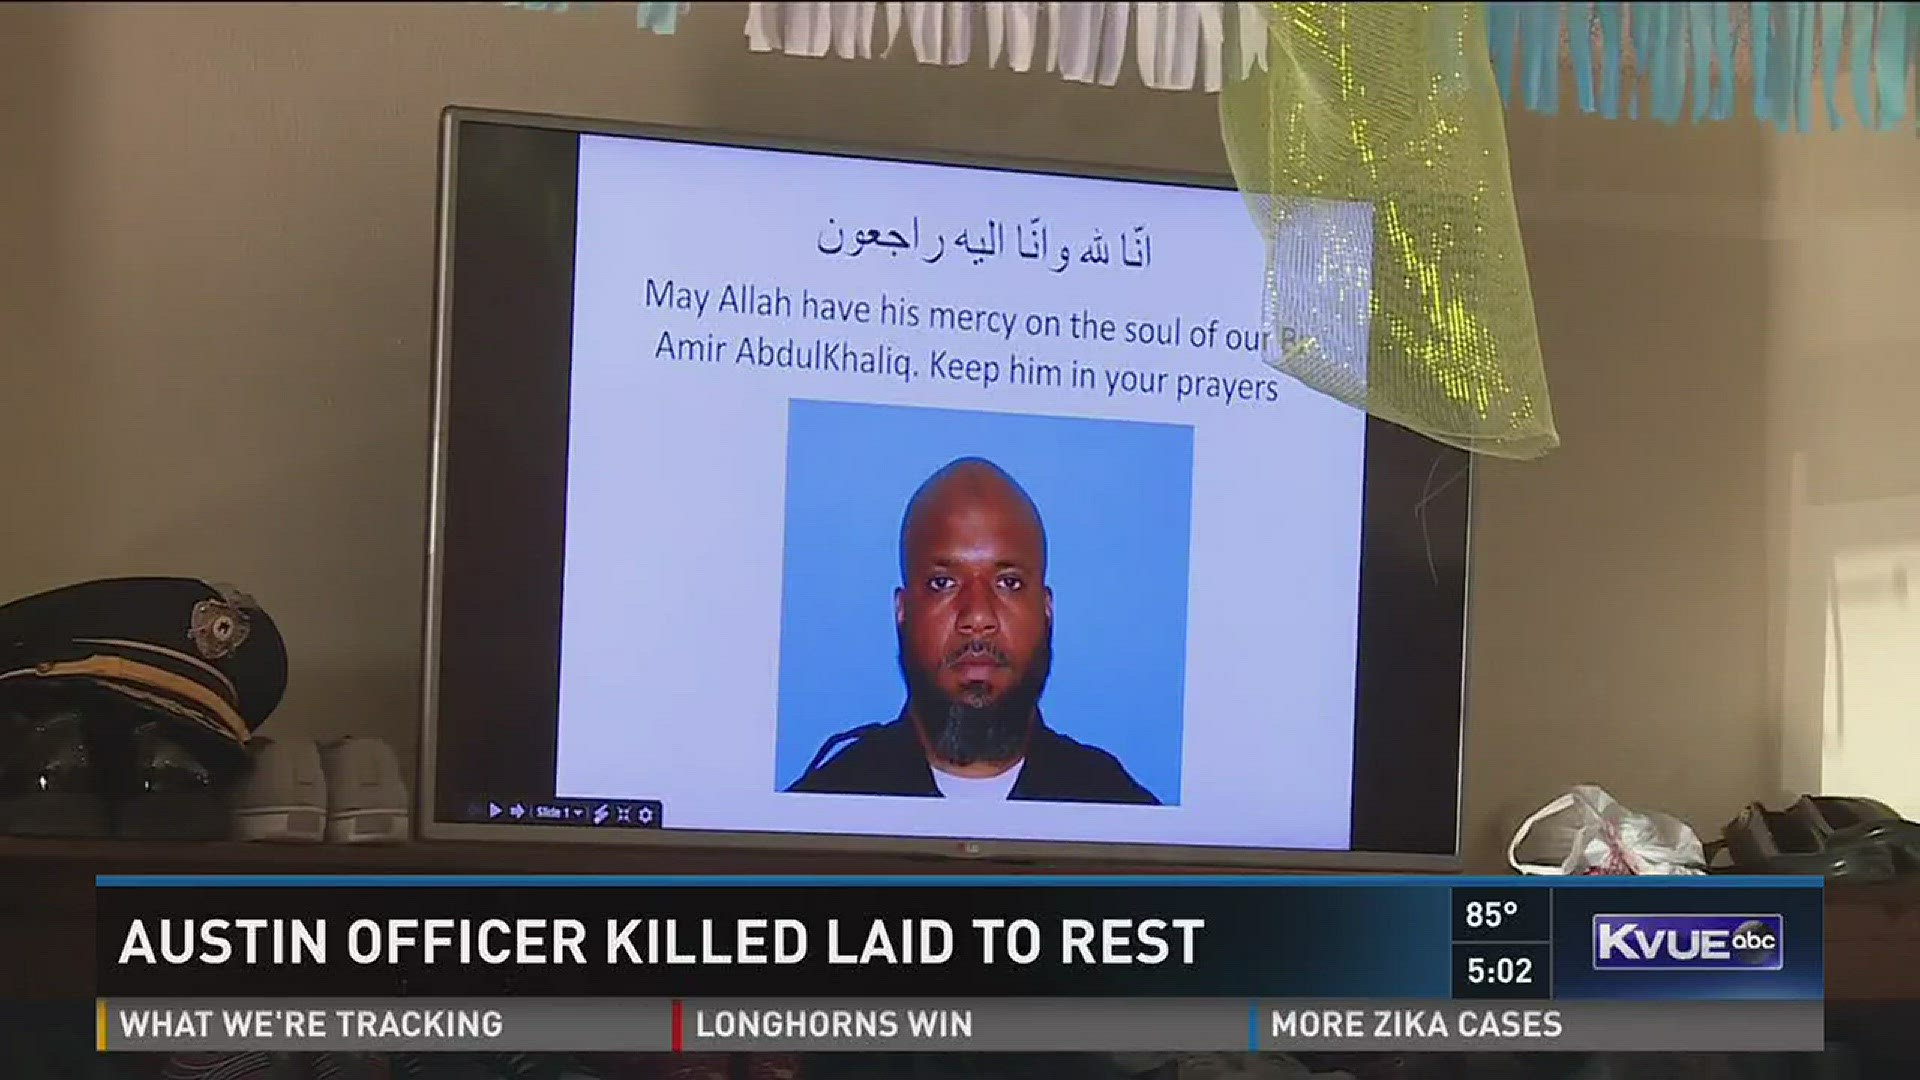 Officer Amir Abdul Khaliq was laid to rest Monday, one day after dying from his injuries in a crash.